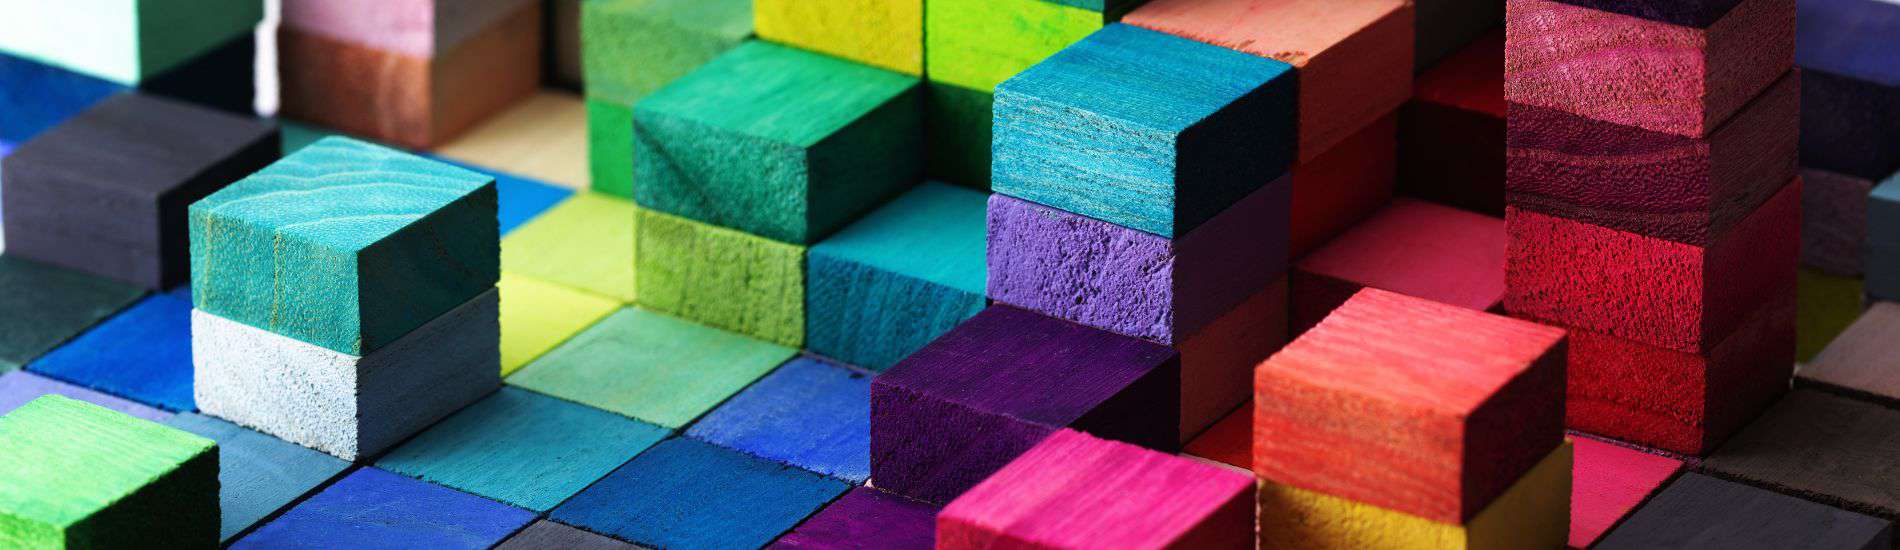 iSS BLOG 7 - 9 Essential Building Blocks for Small Business Success